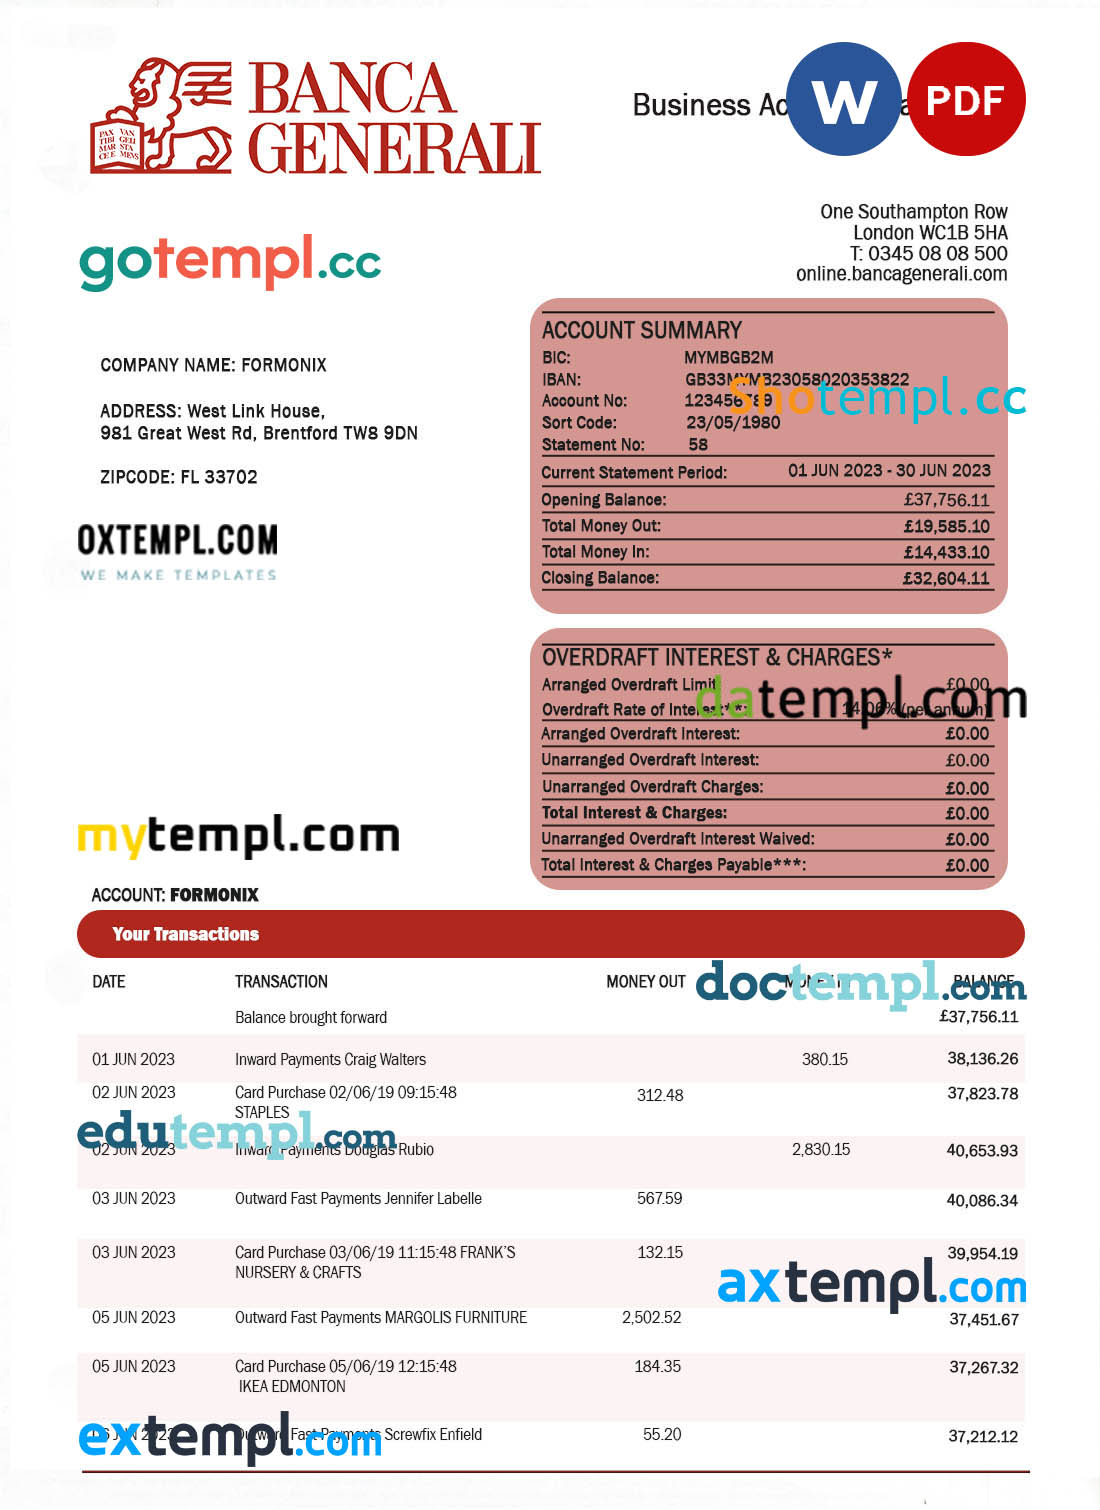 editable template, Banca Generali organization checking account statement Word and PDF template